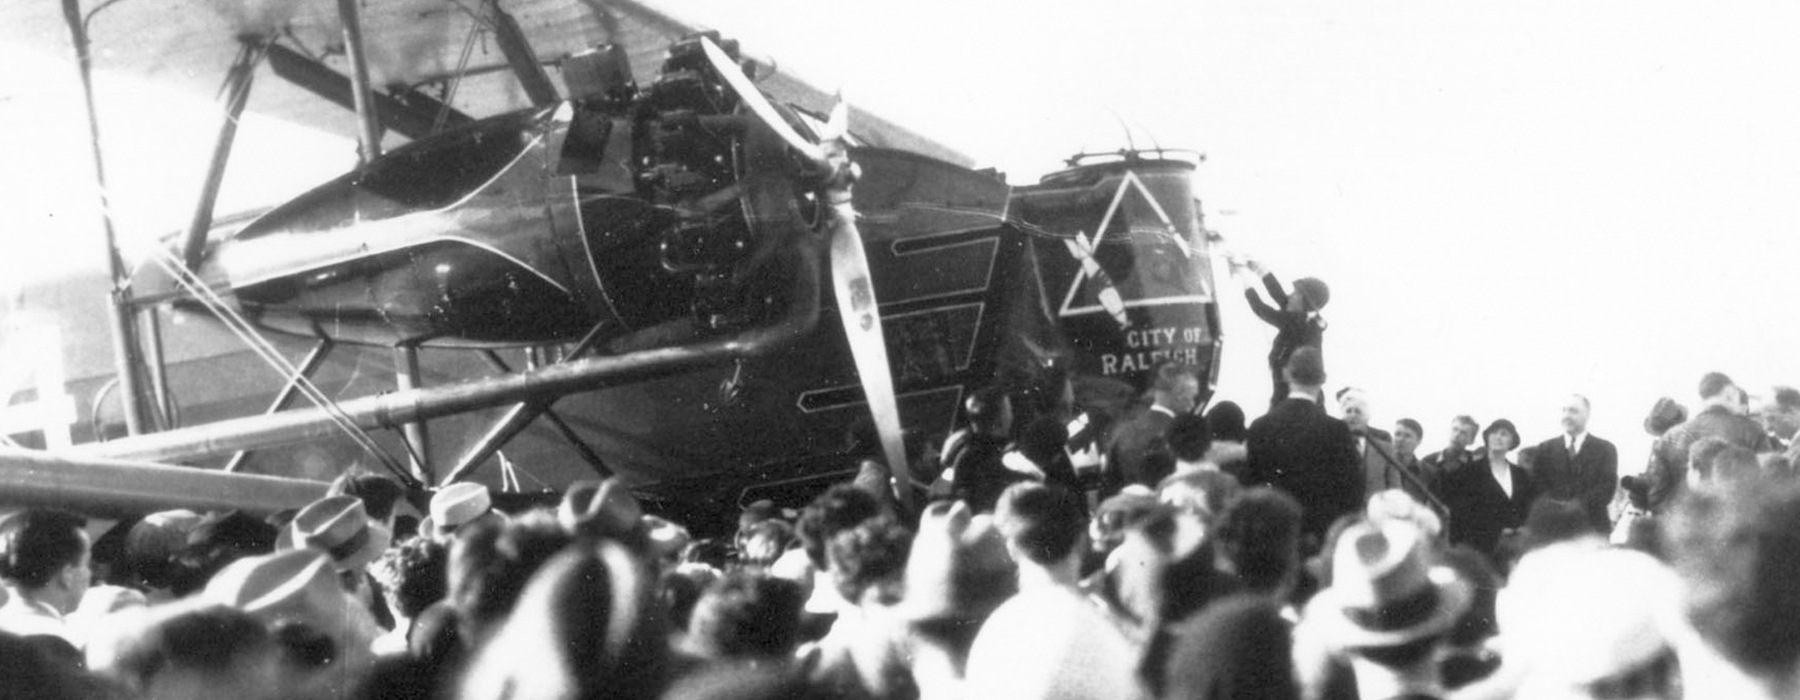 retro image of a pilot preparing their plane in front of a crowd